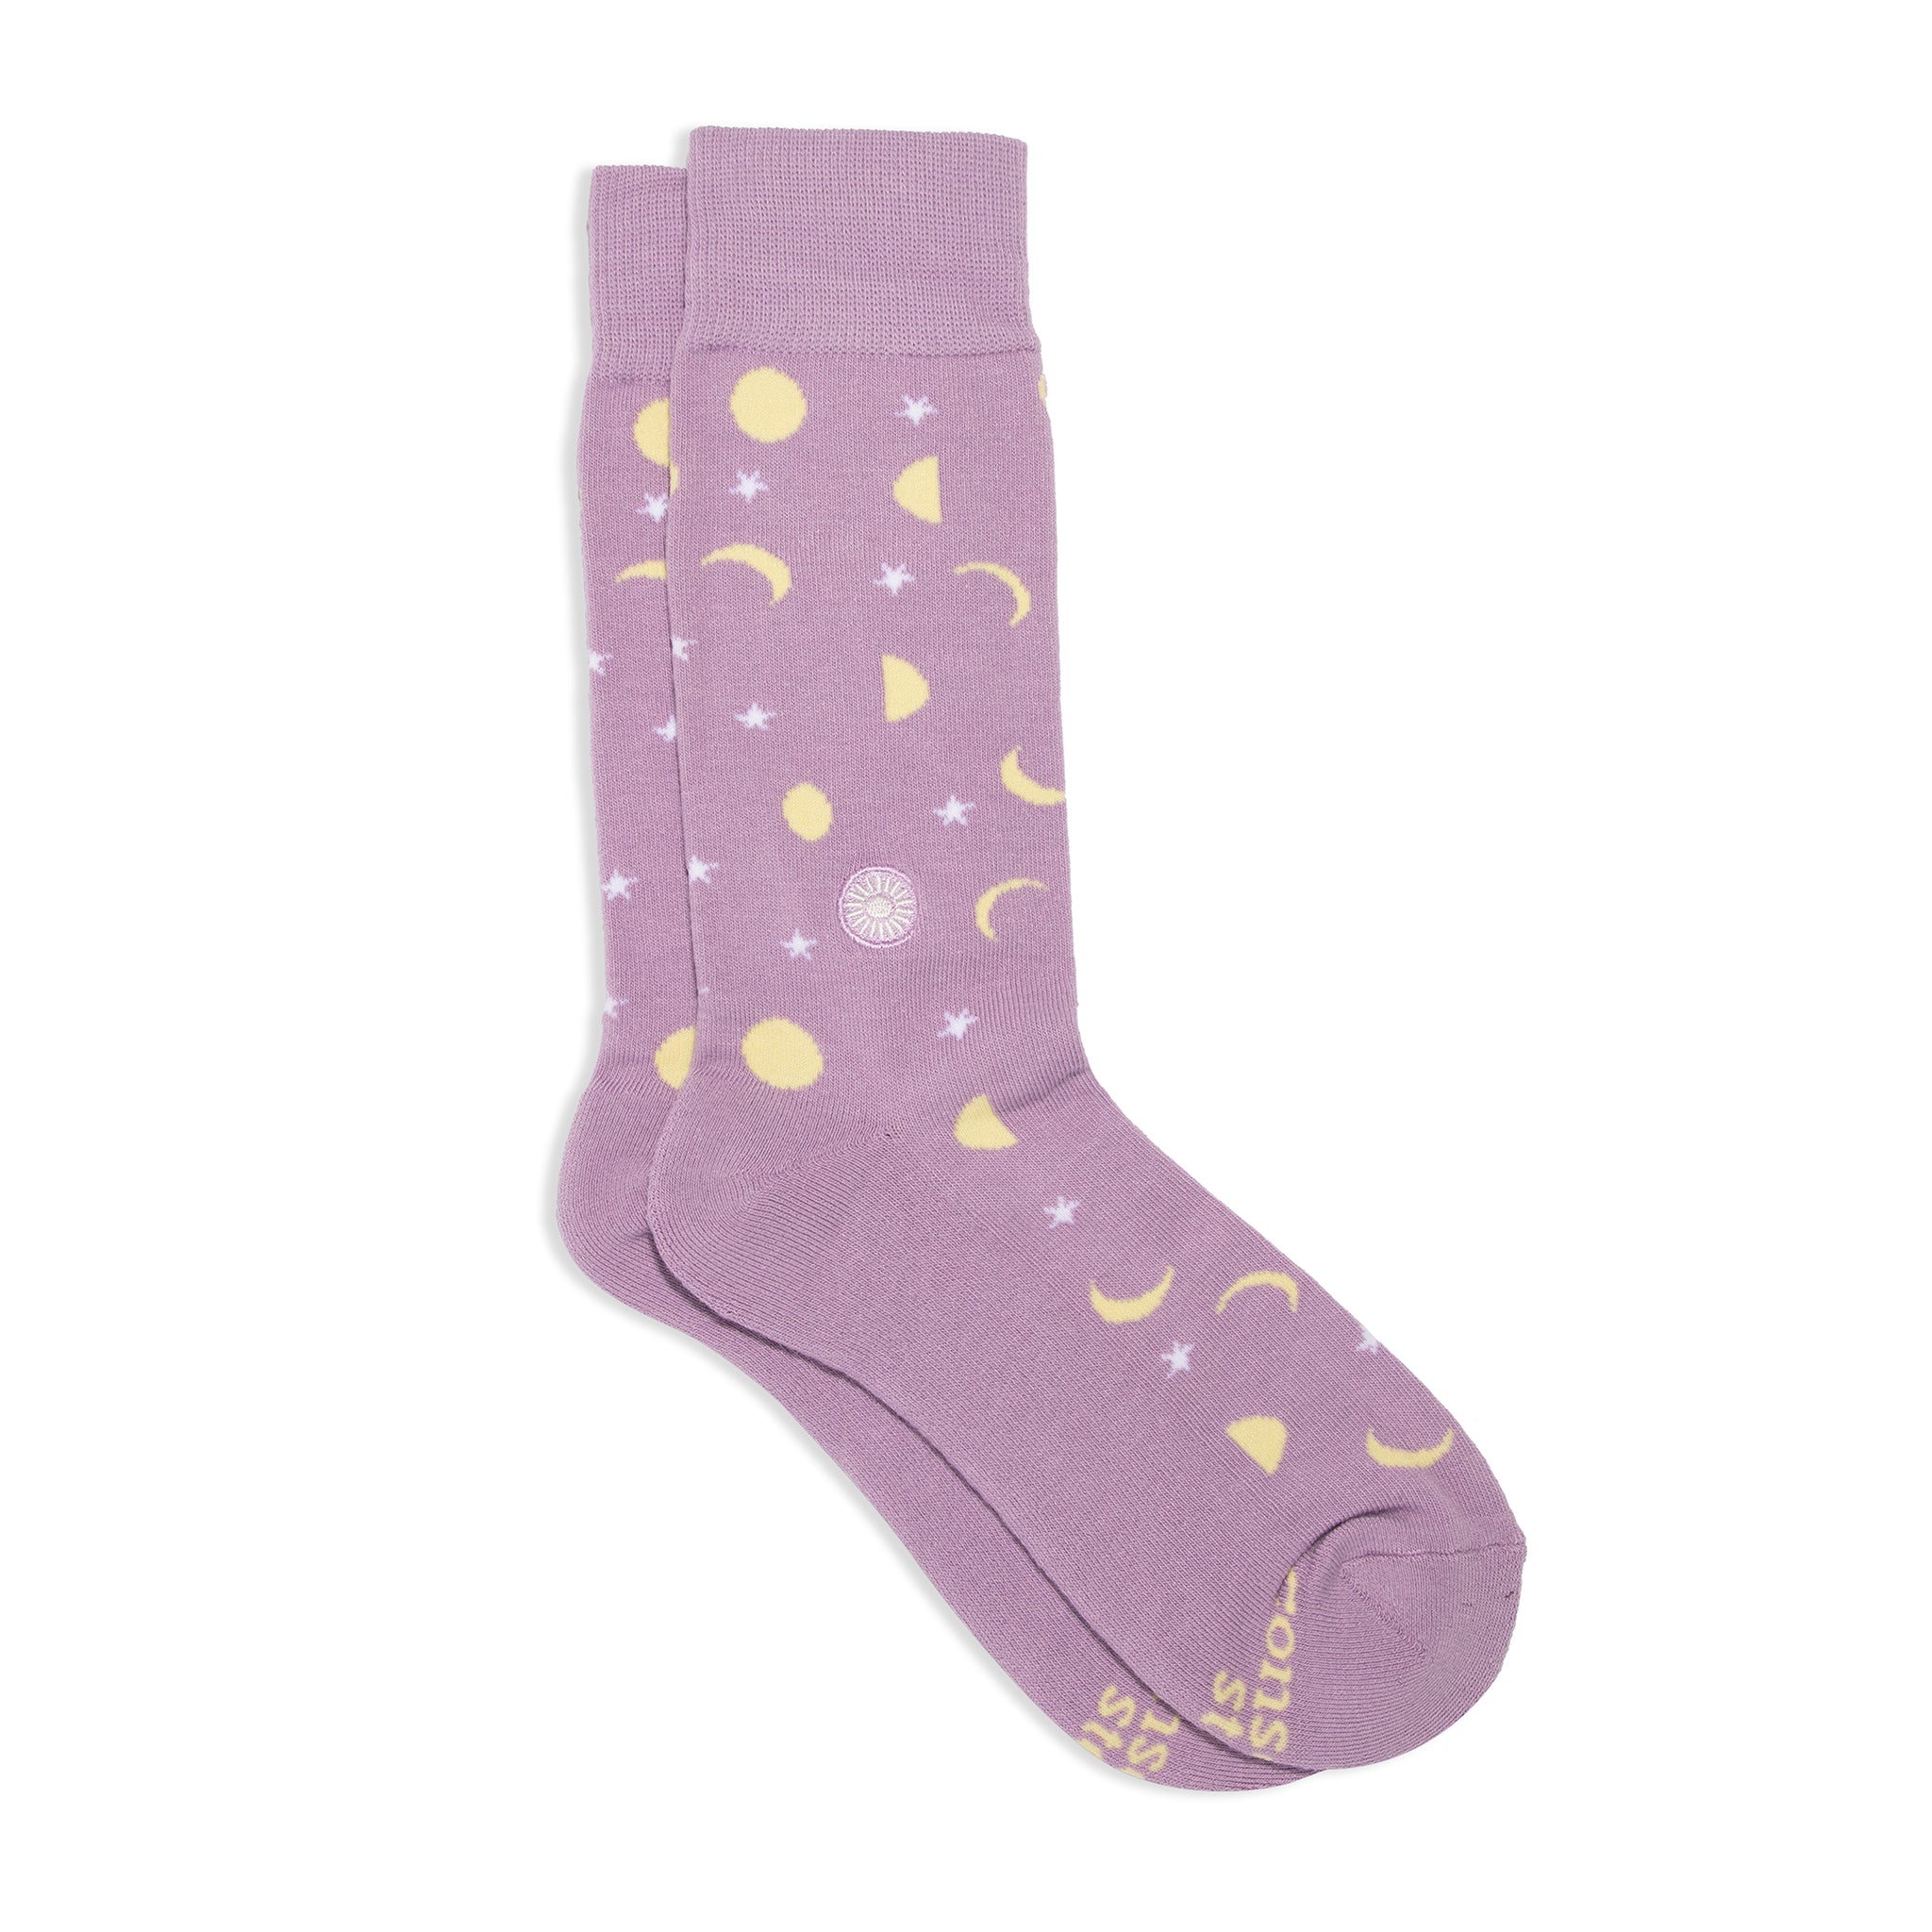 Image of Socks that Support Mental Health